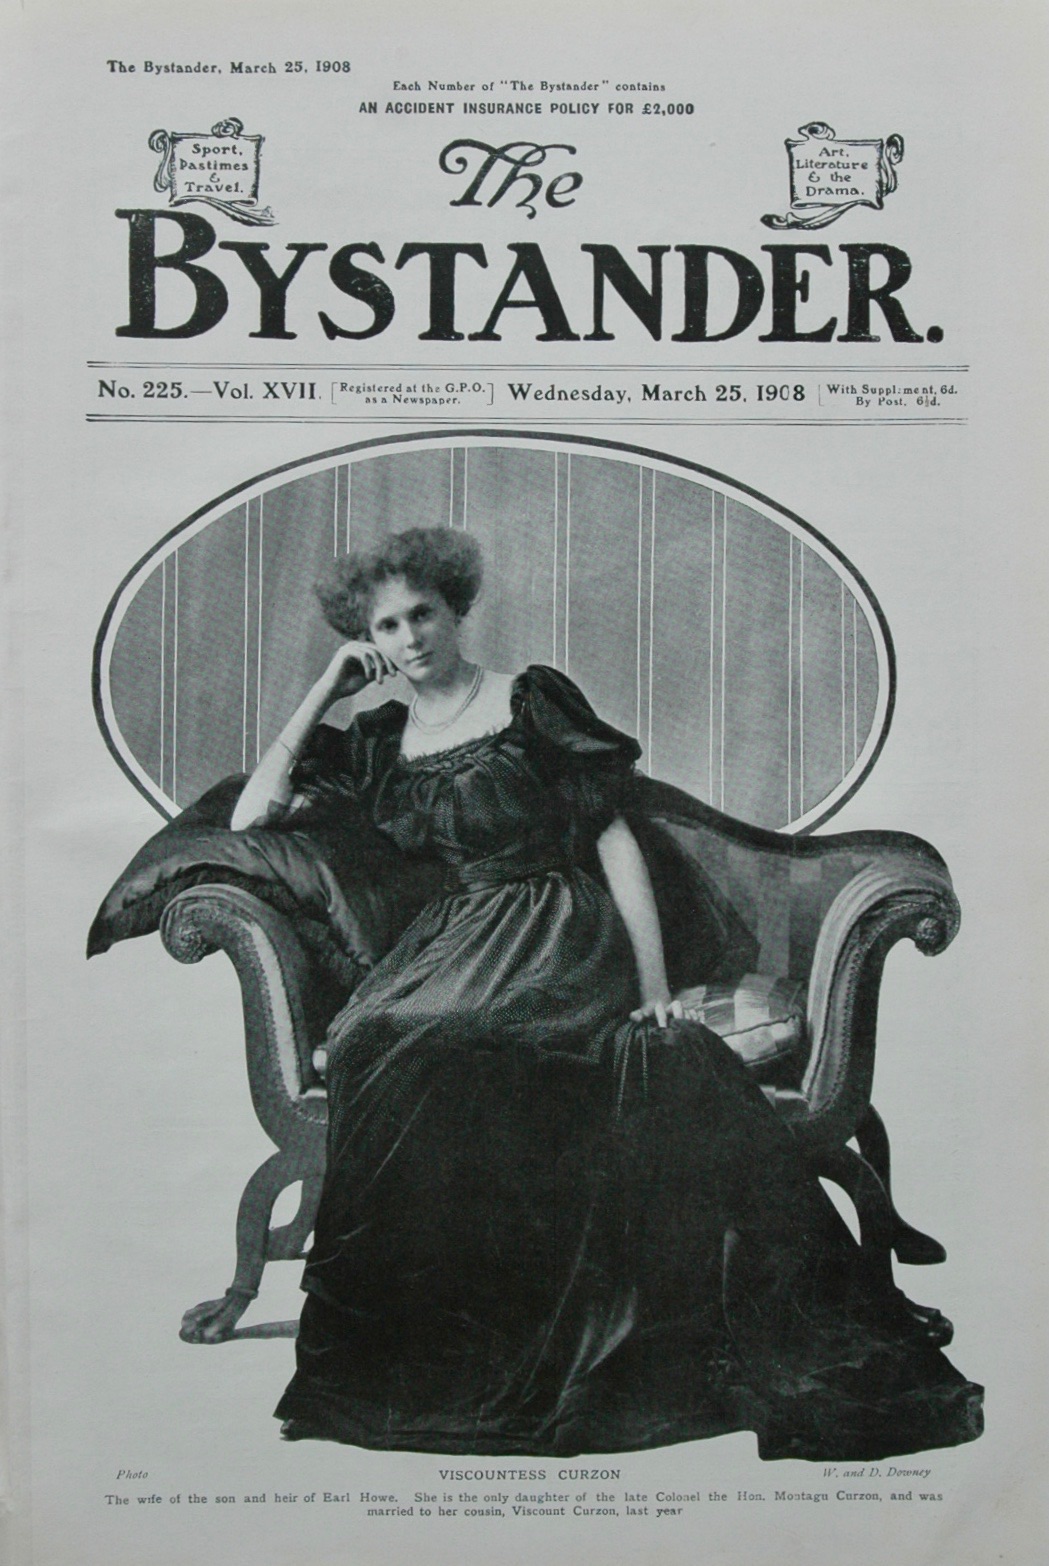 The Bystander, March 25, 1908